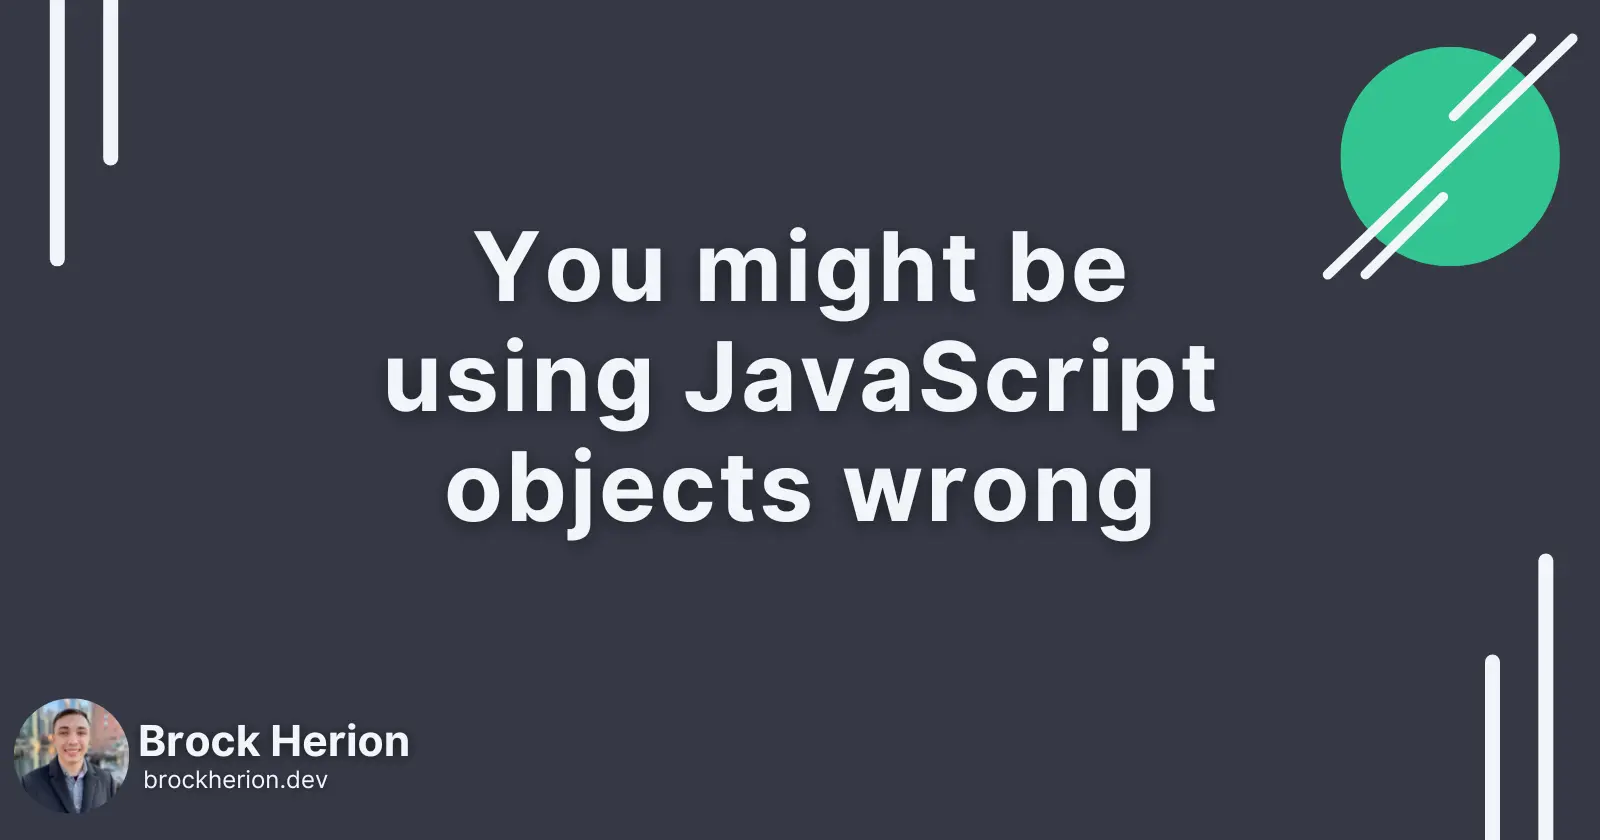 You might be using JavaScript objects wrong